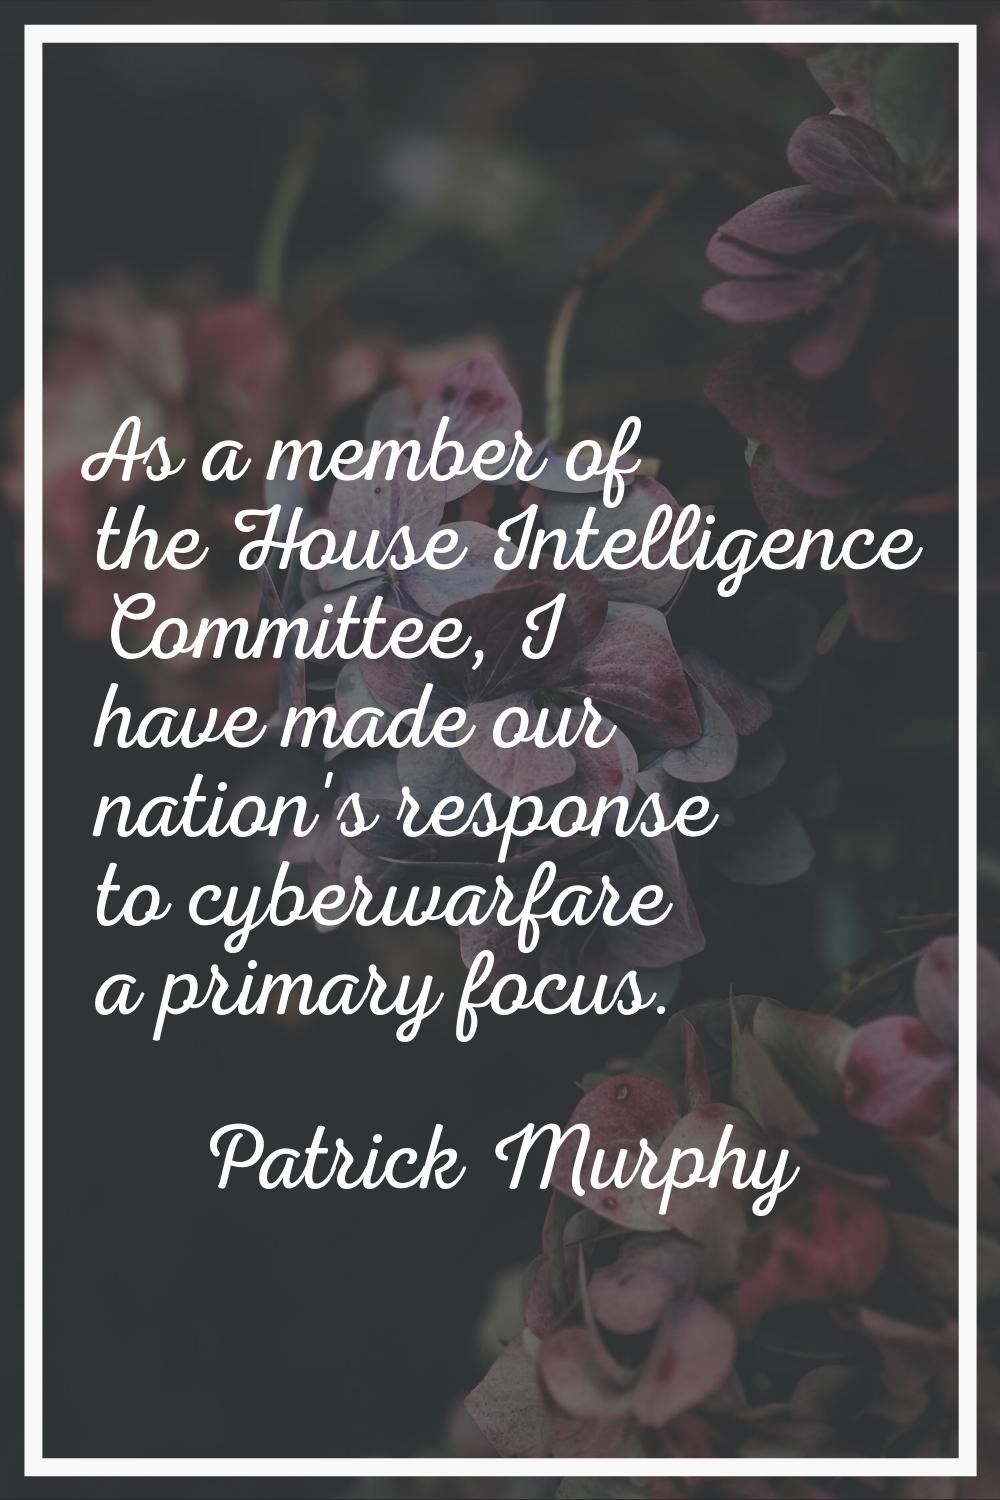 As a member of the House Intelligence Committee, I have made our nation's response to cyberwarfare 